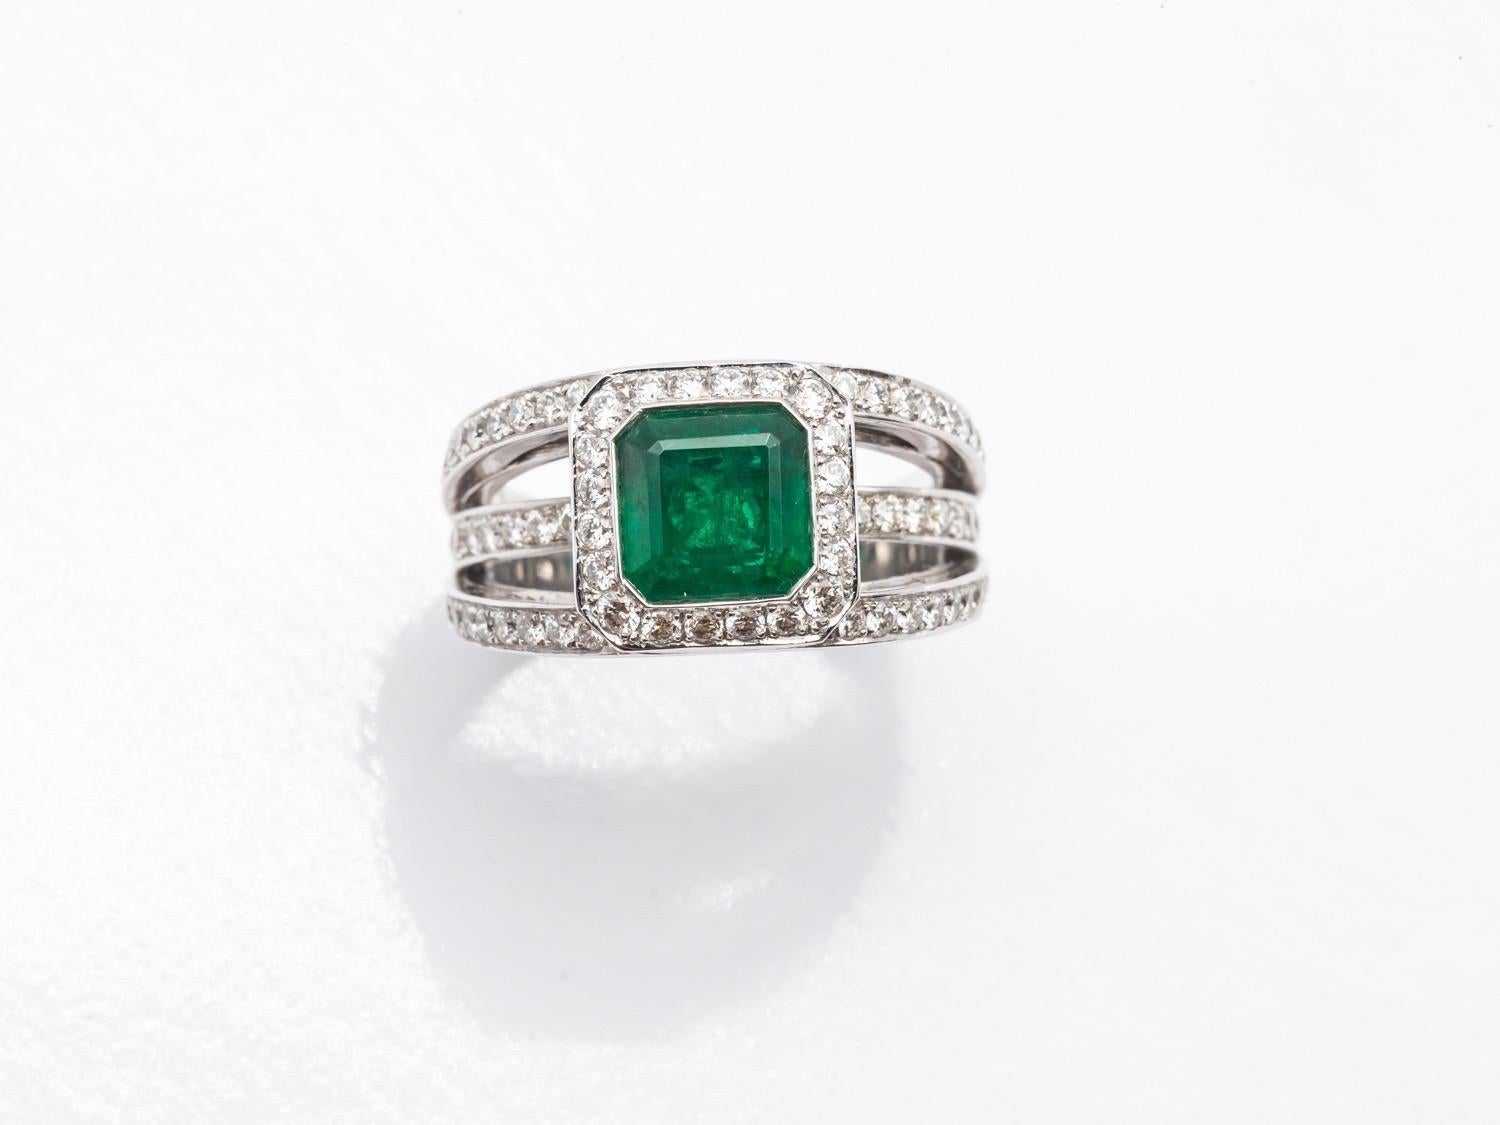 Certified Emerald Ring Diamond Paving White Gold 18 Karat In New Condition For Sale In Vannes, FR